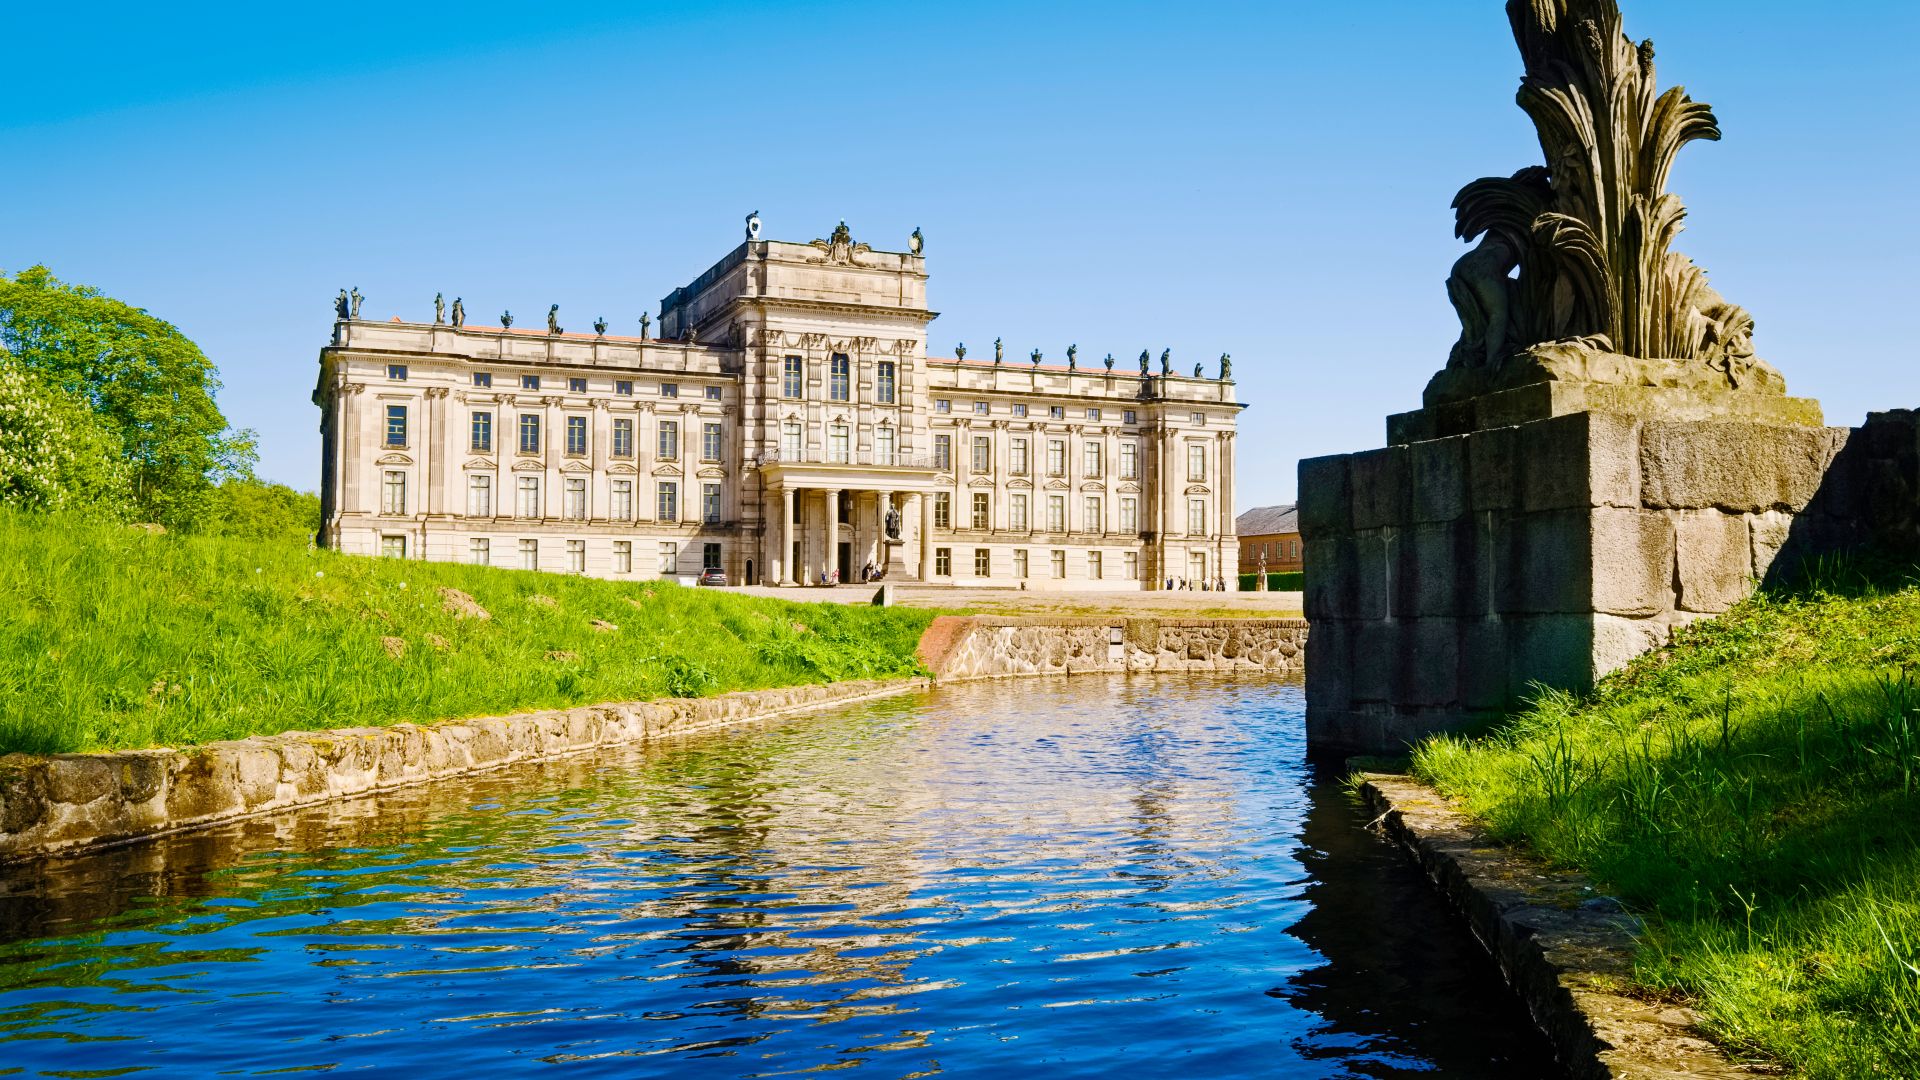 Ludwigslust: Ludwigslust Castle with canal in the castle park